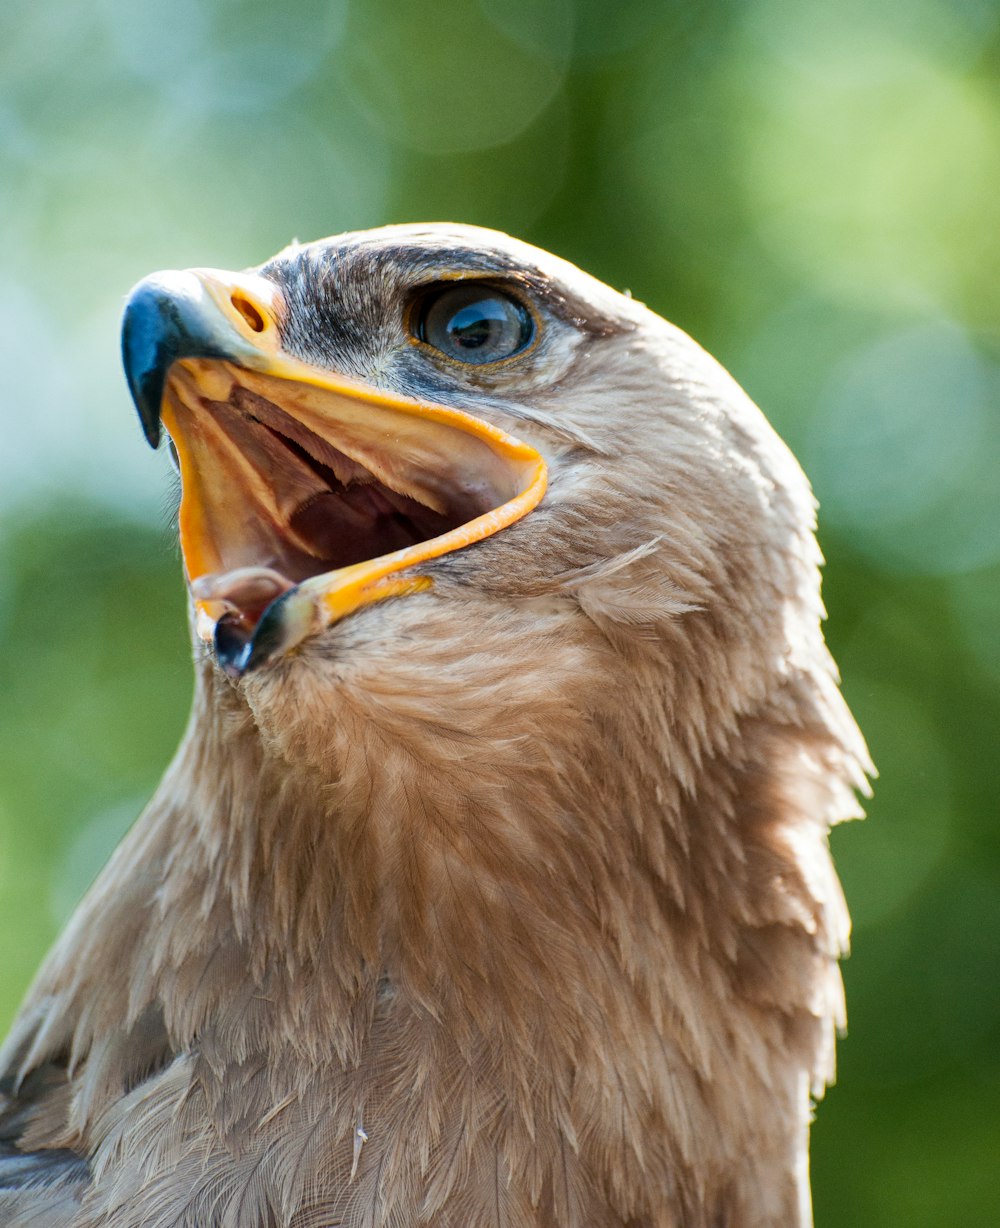 a close up of a bird with its mouth open